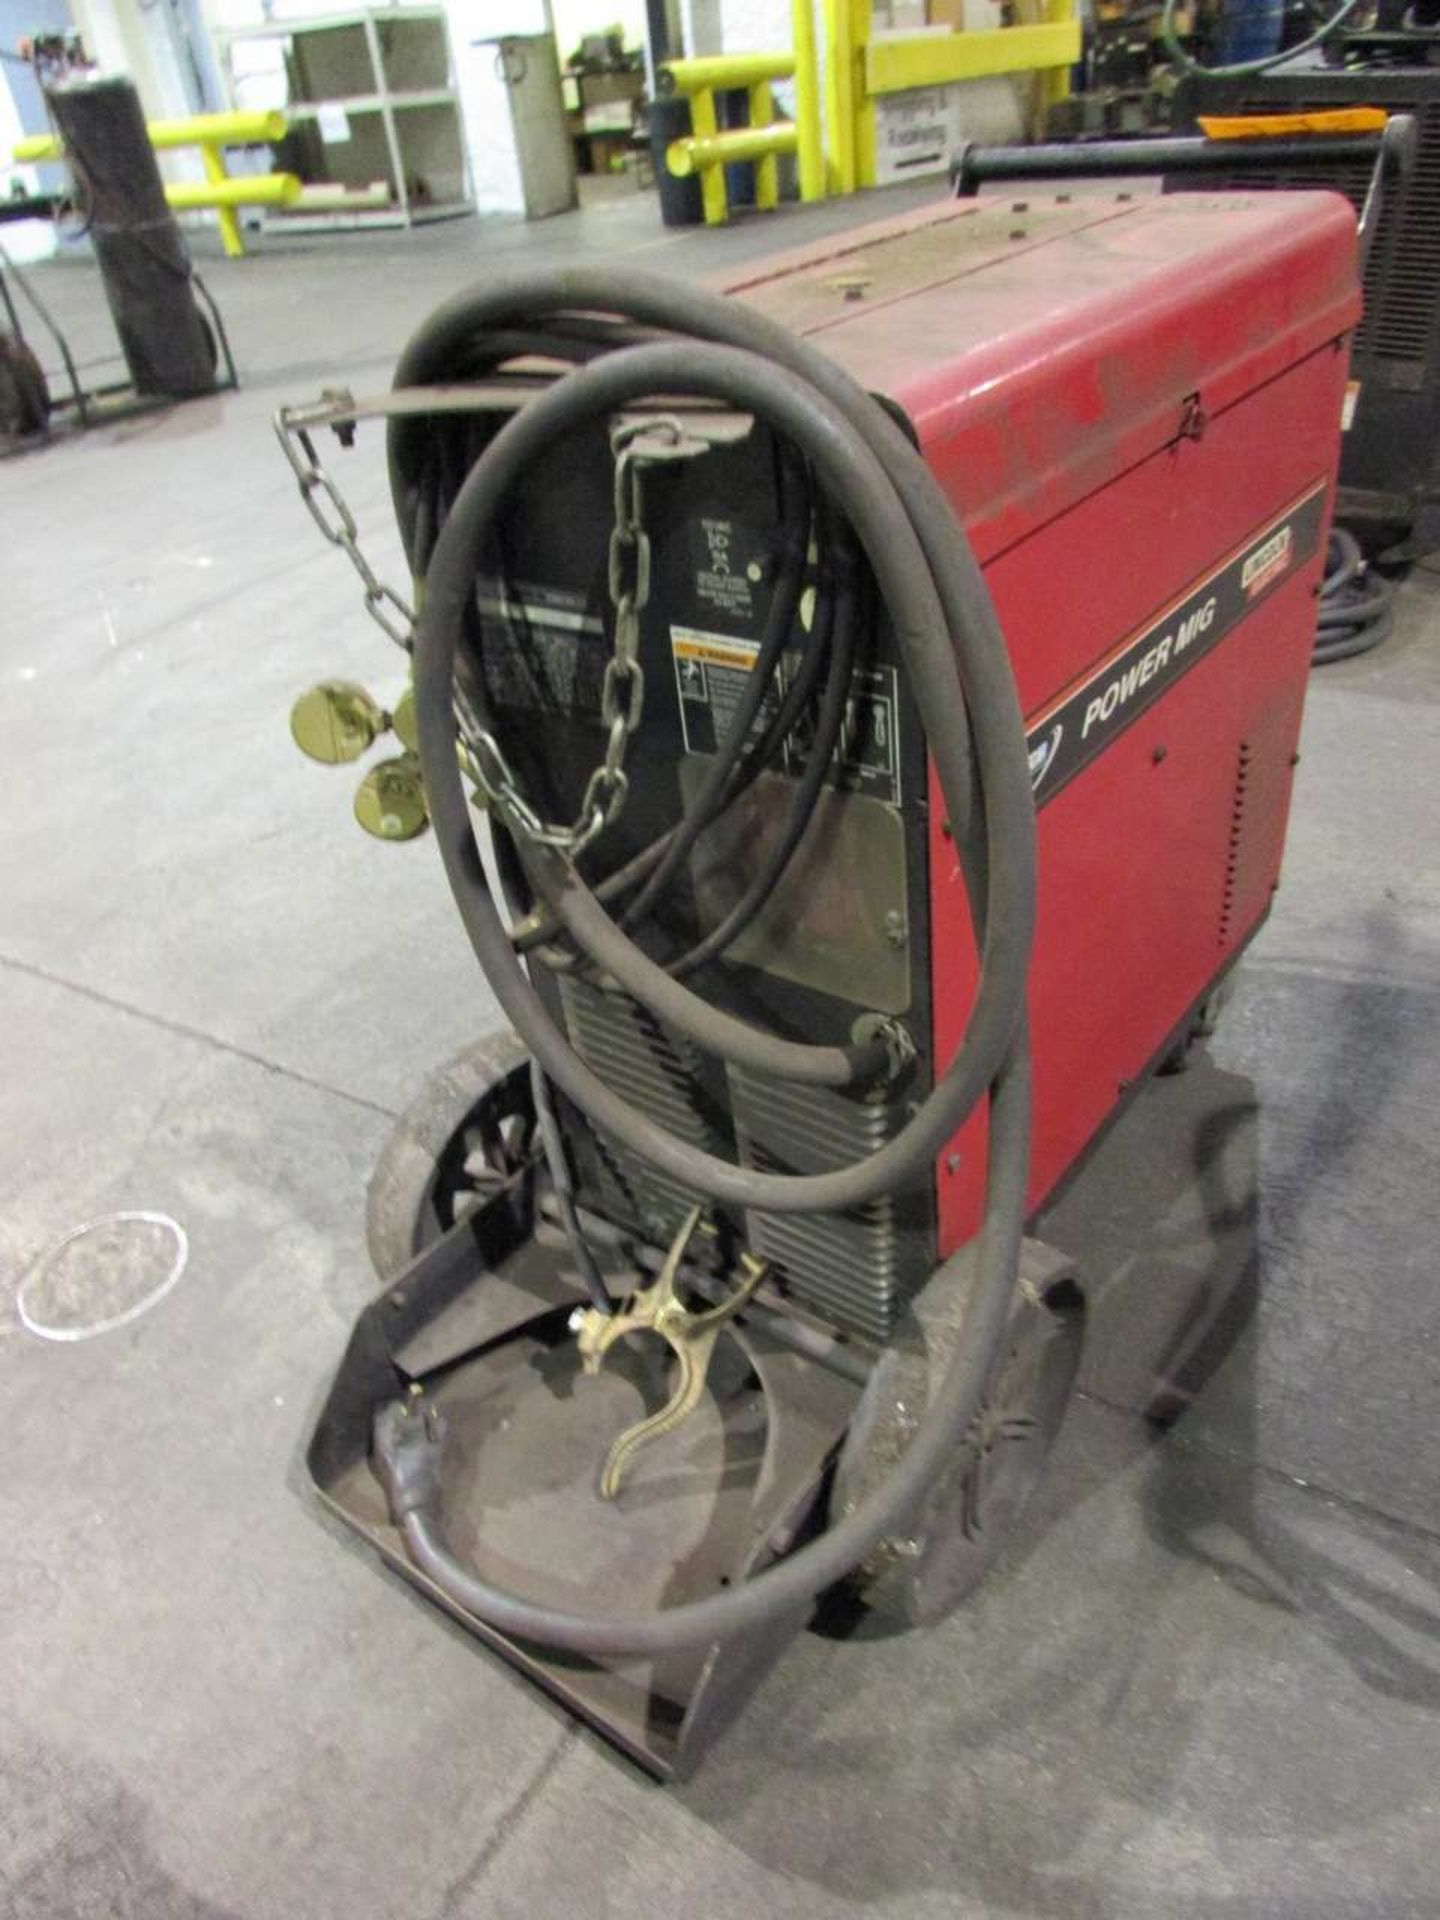 Lincoln Electric Power MIG 215 CV DC Welding Power Source - Image 5 of 5